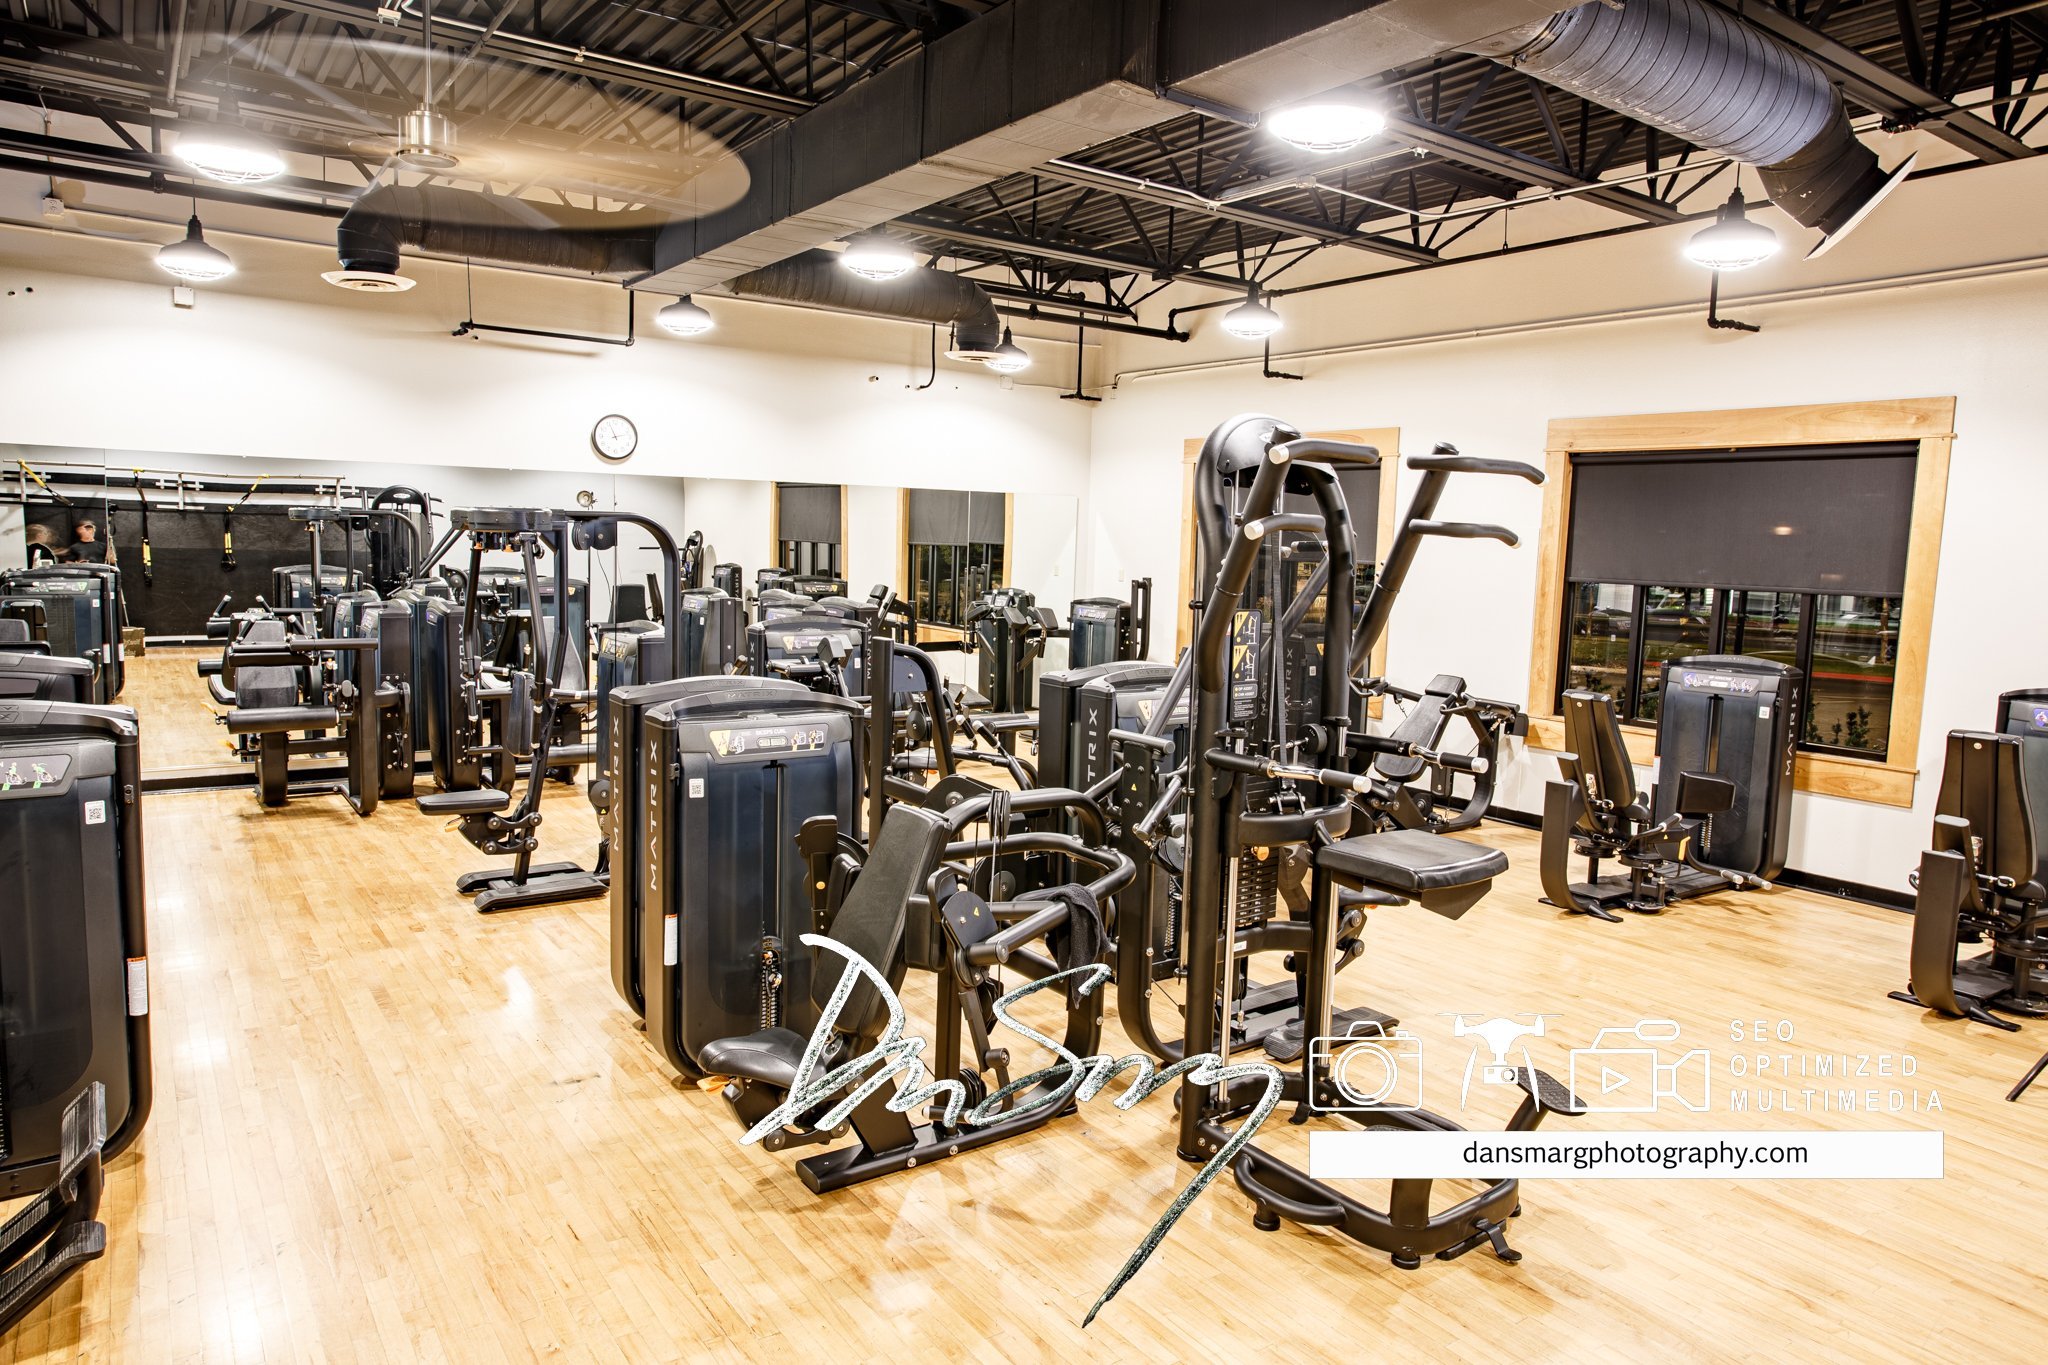 DanSmargPhotography.com-SEO-Optimmized-Multimedia-Content-The-Wave-Fitness-Center-Whitefish-Montana-31.jpg